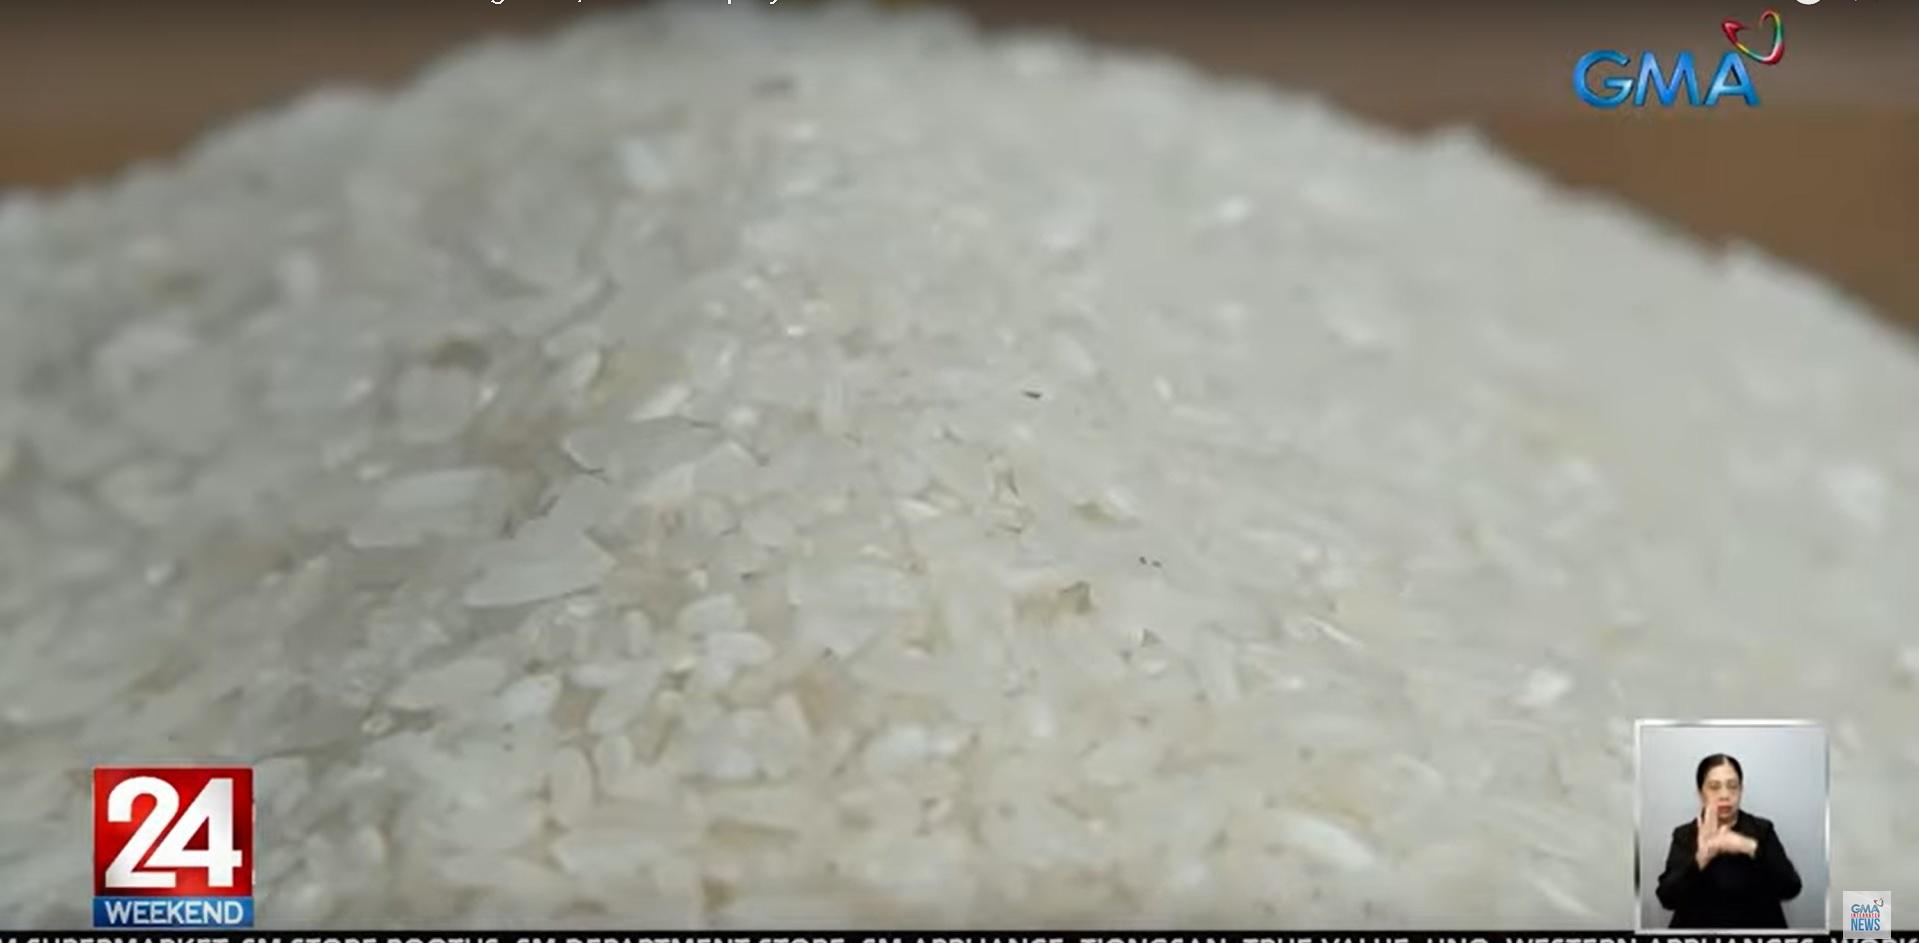 rice prices in some bicol stores as high as p75 per kilo, says group